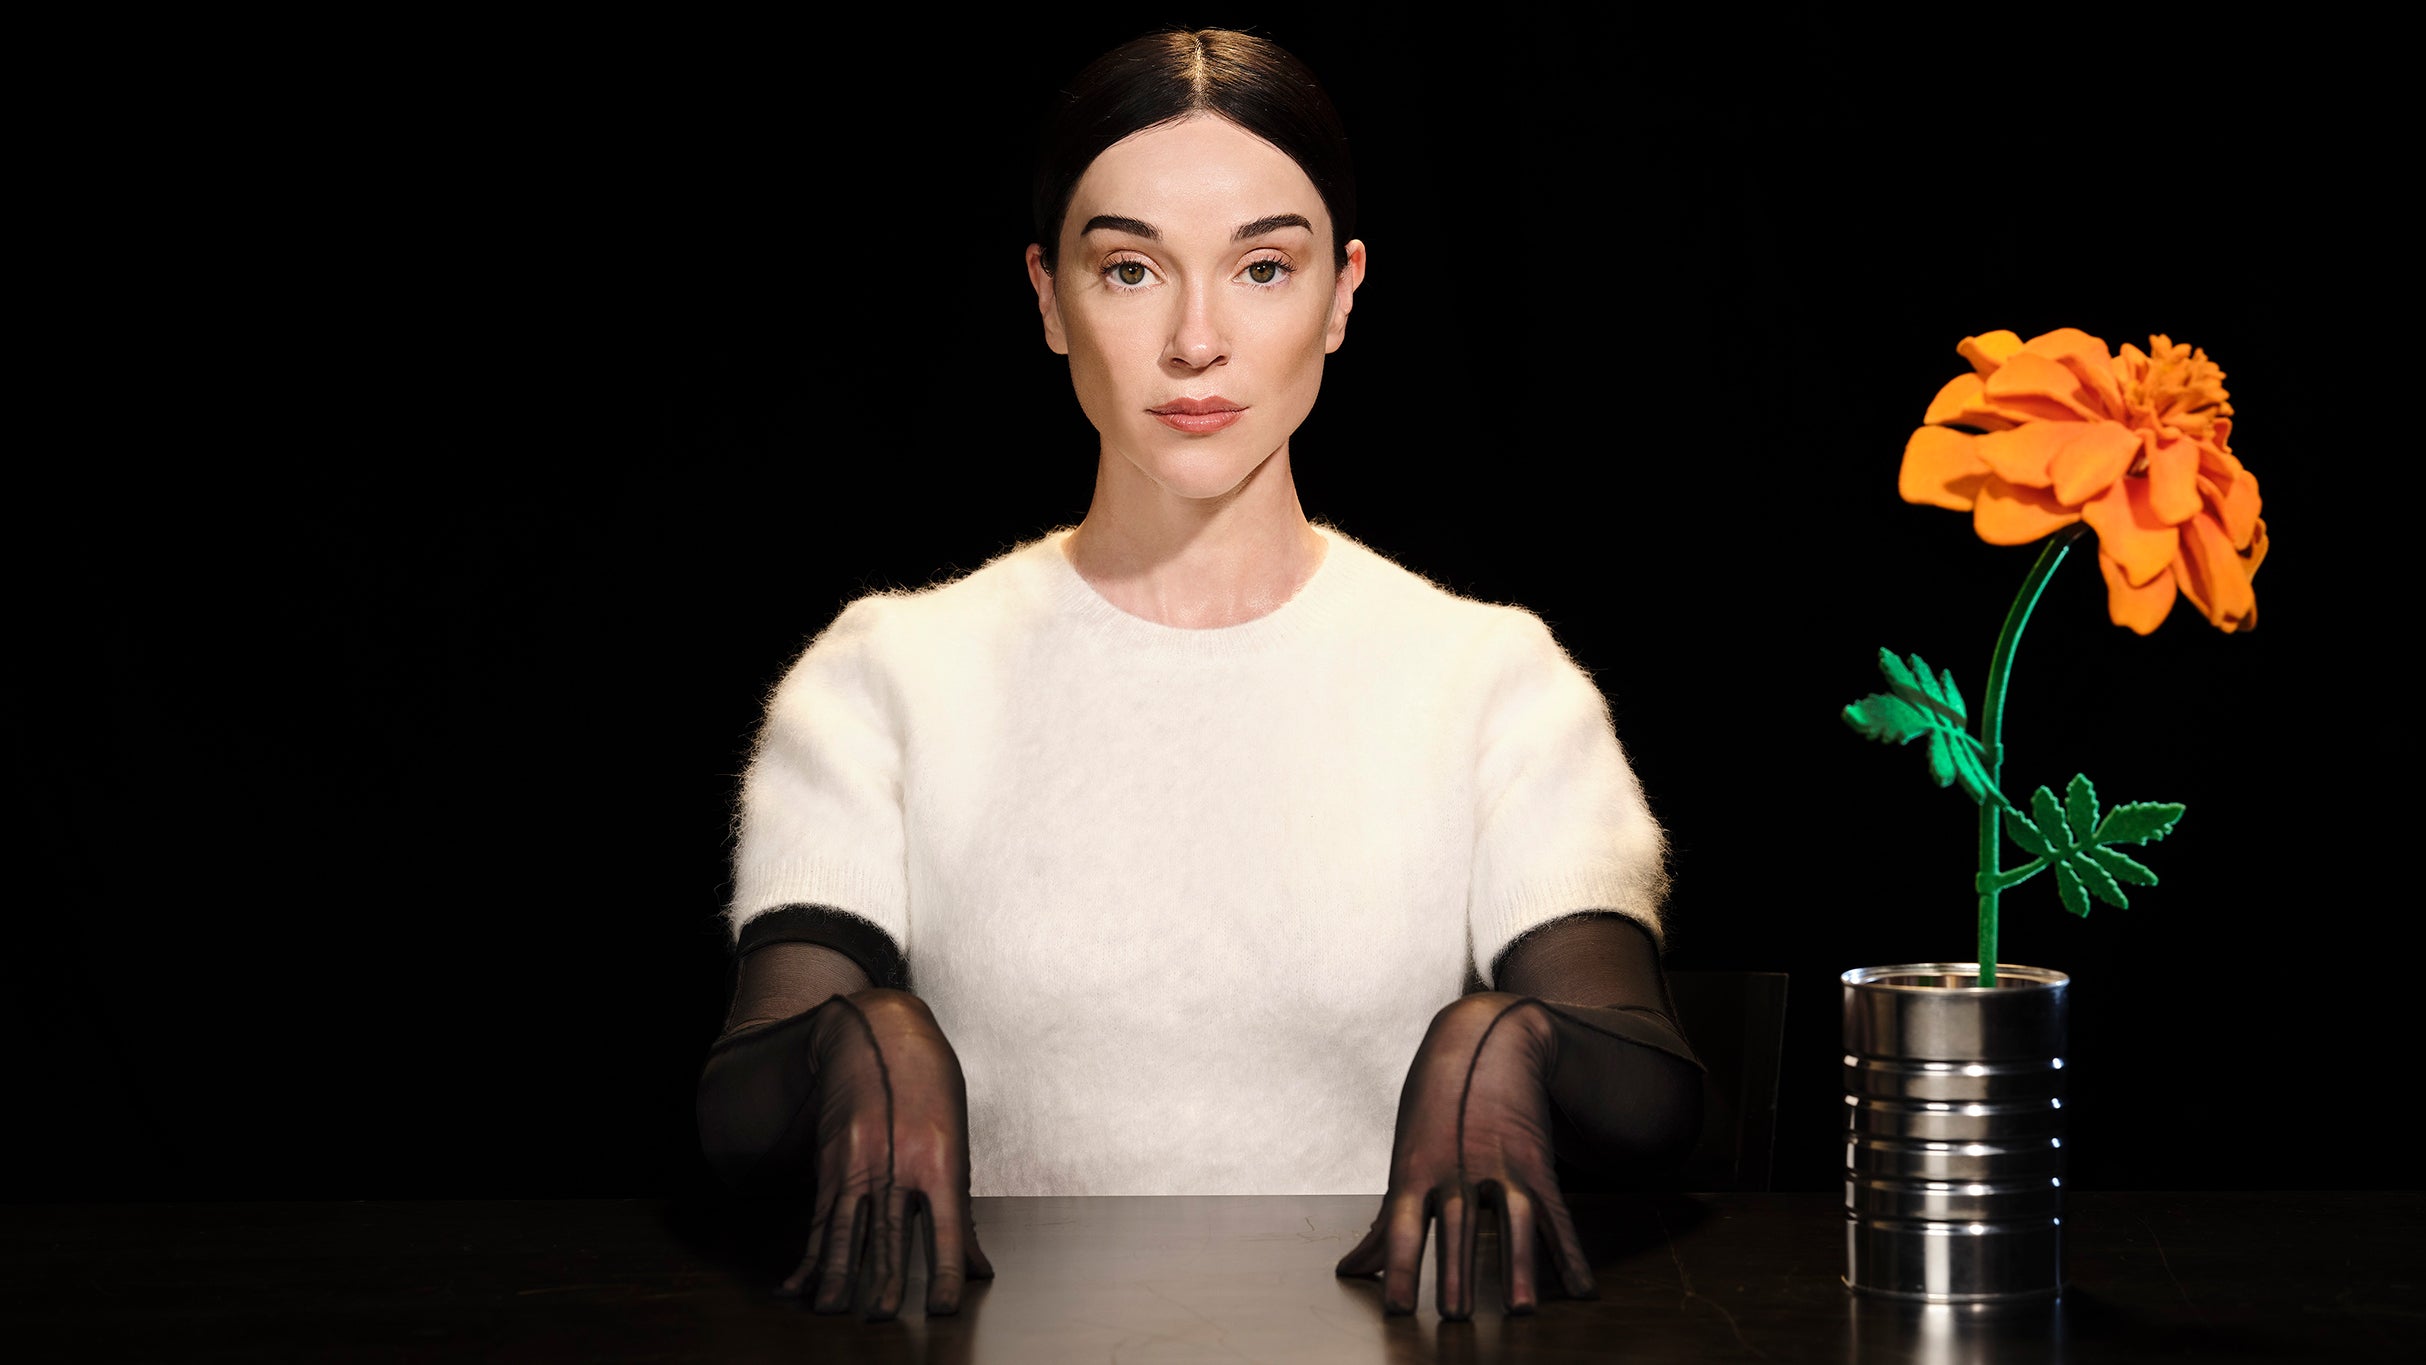 members only presale passcode for St. Vincent face value tickets in Los Angeles